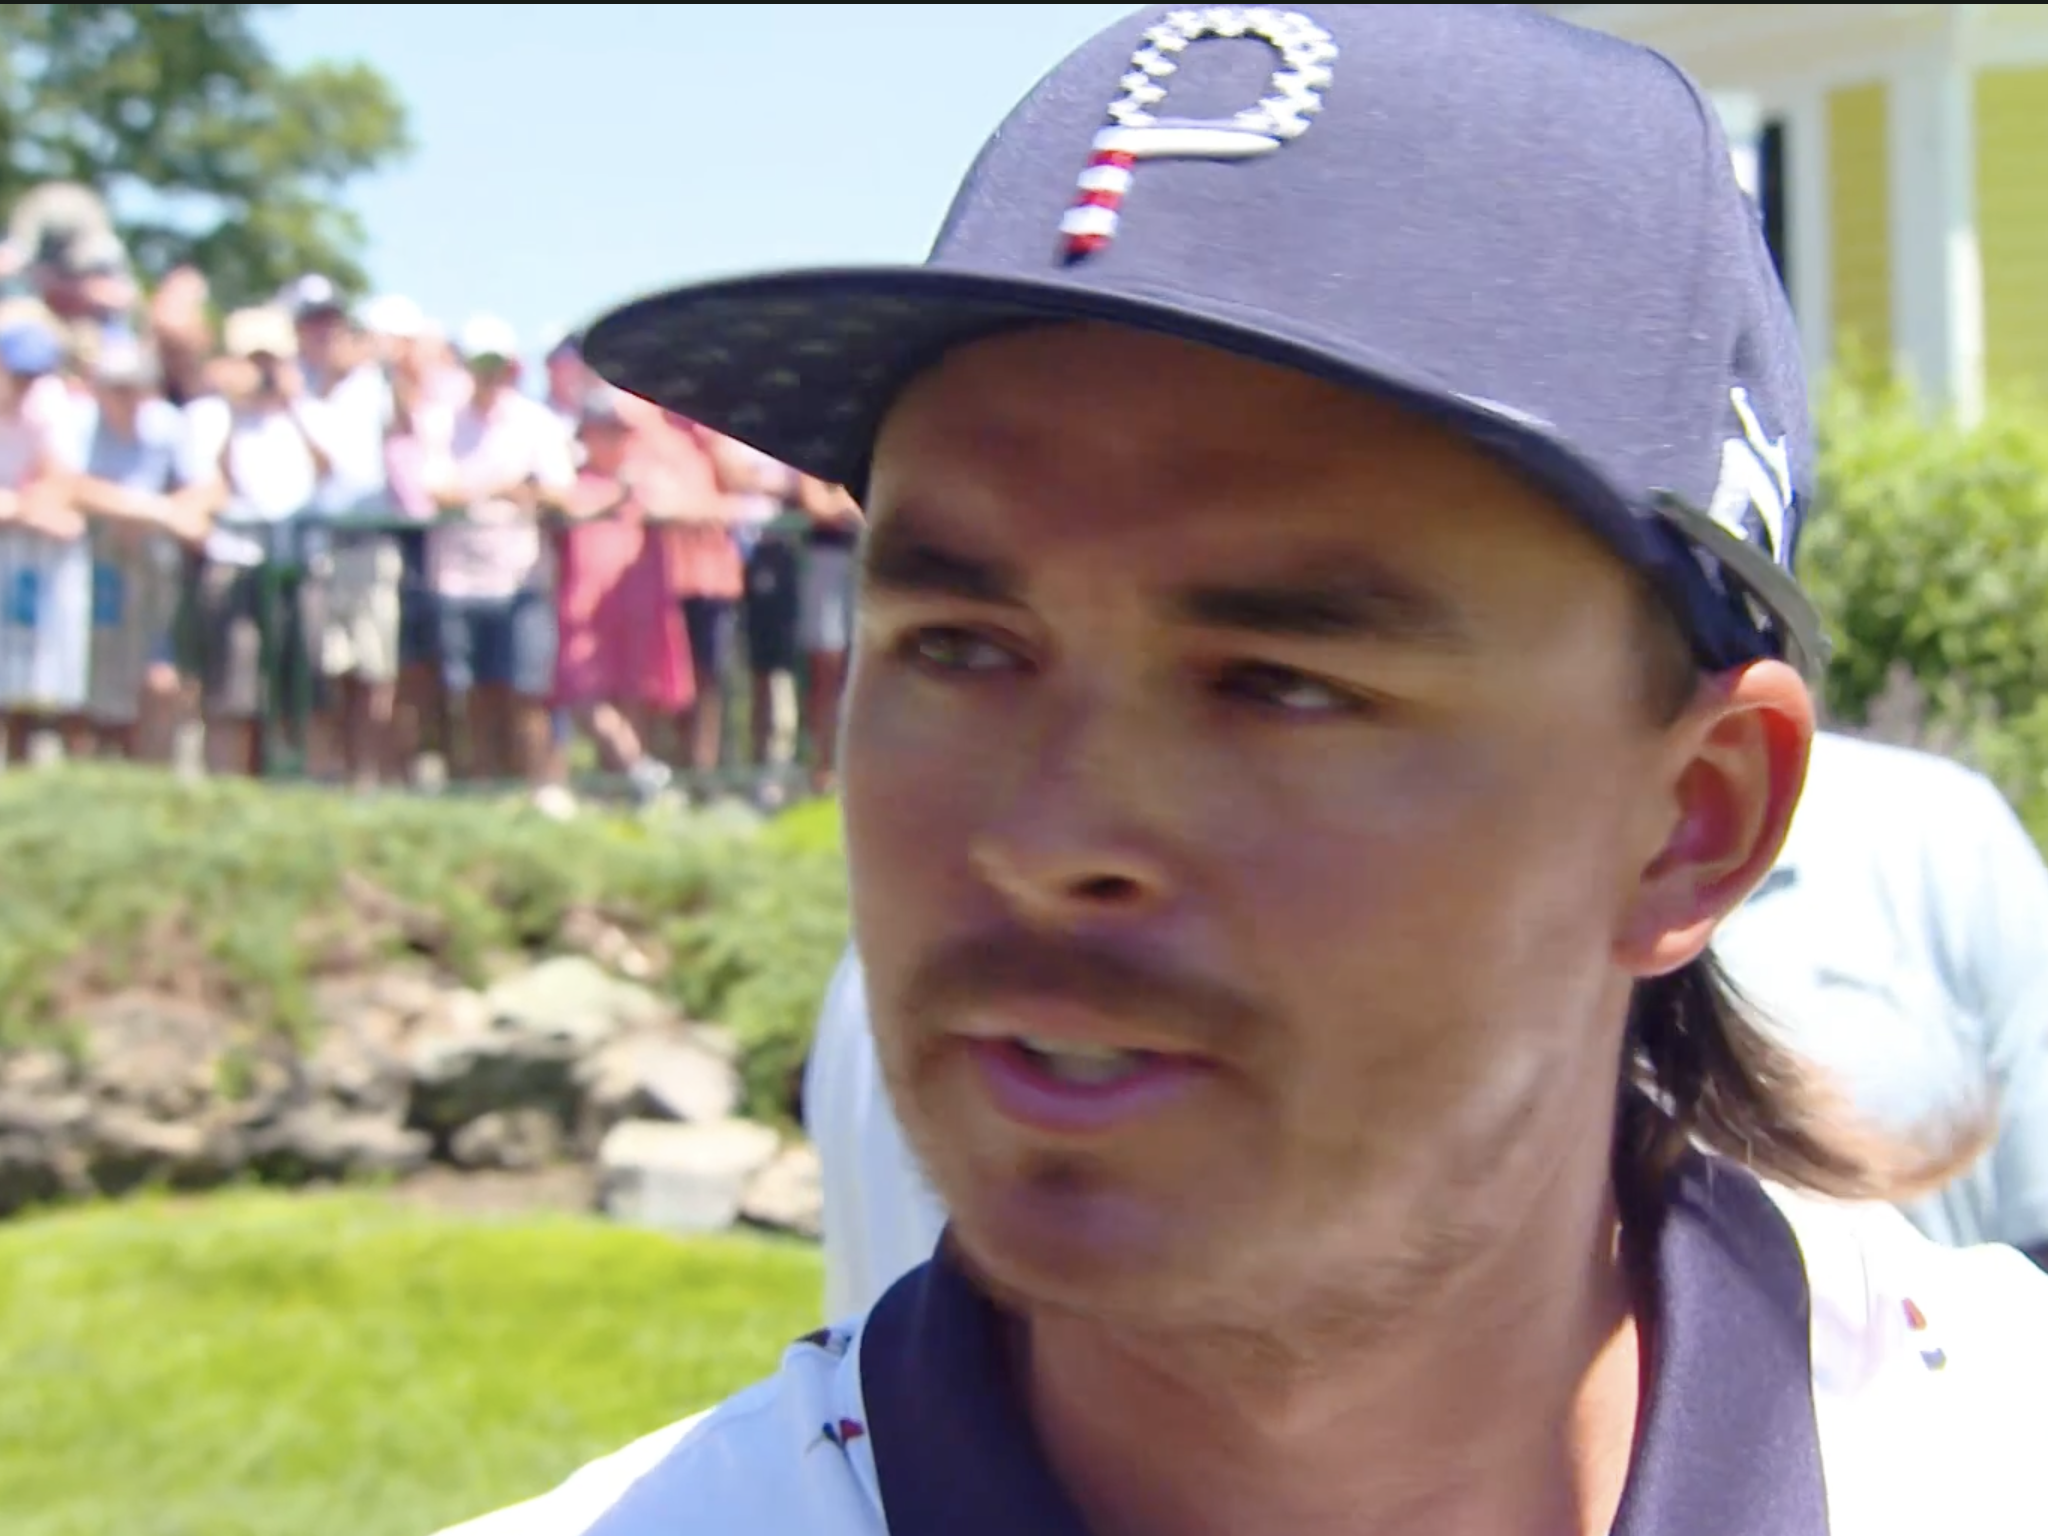 Rickie Fowler shares his thoughts on 'interesting' Super Golf League –  GolfWRX